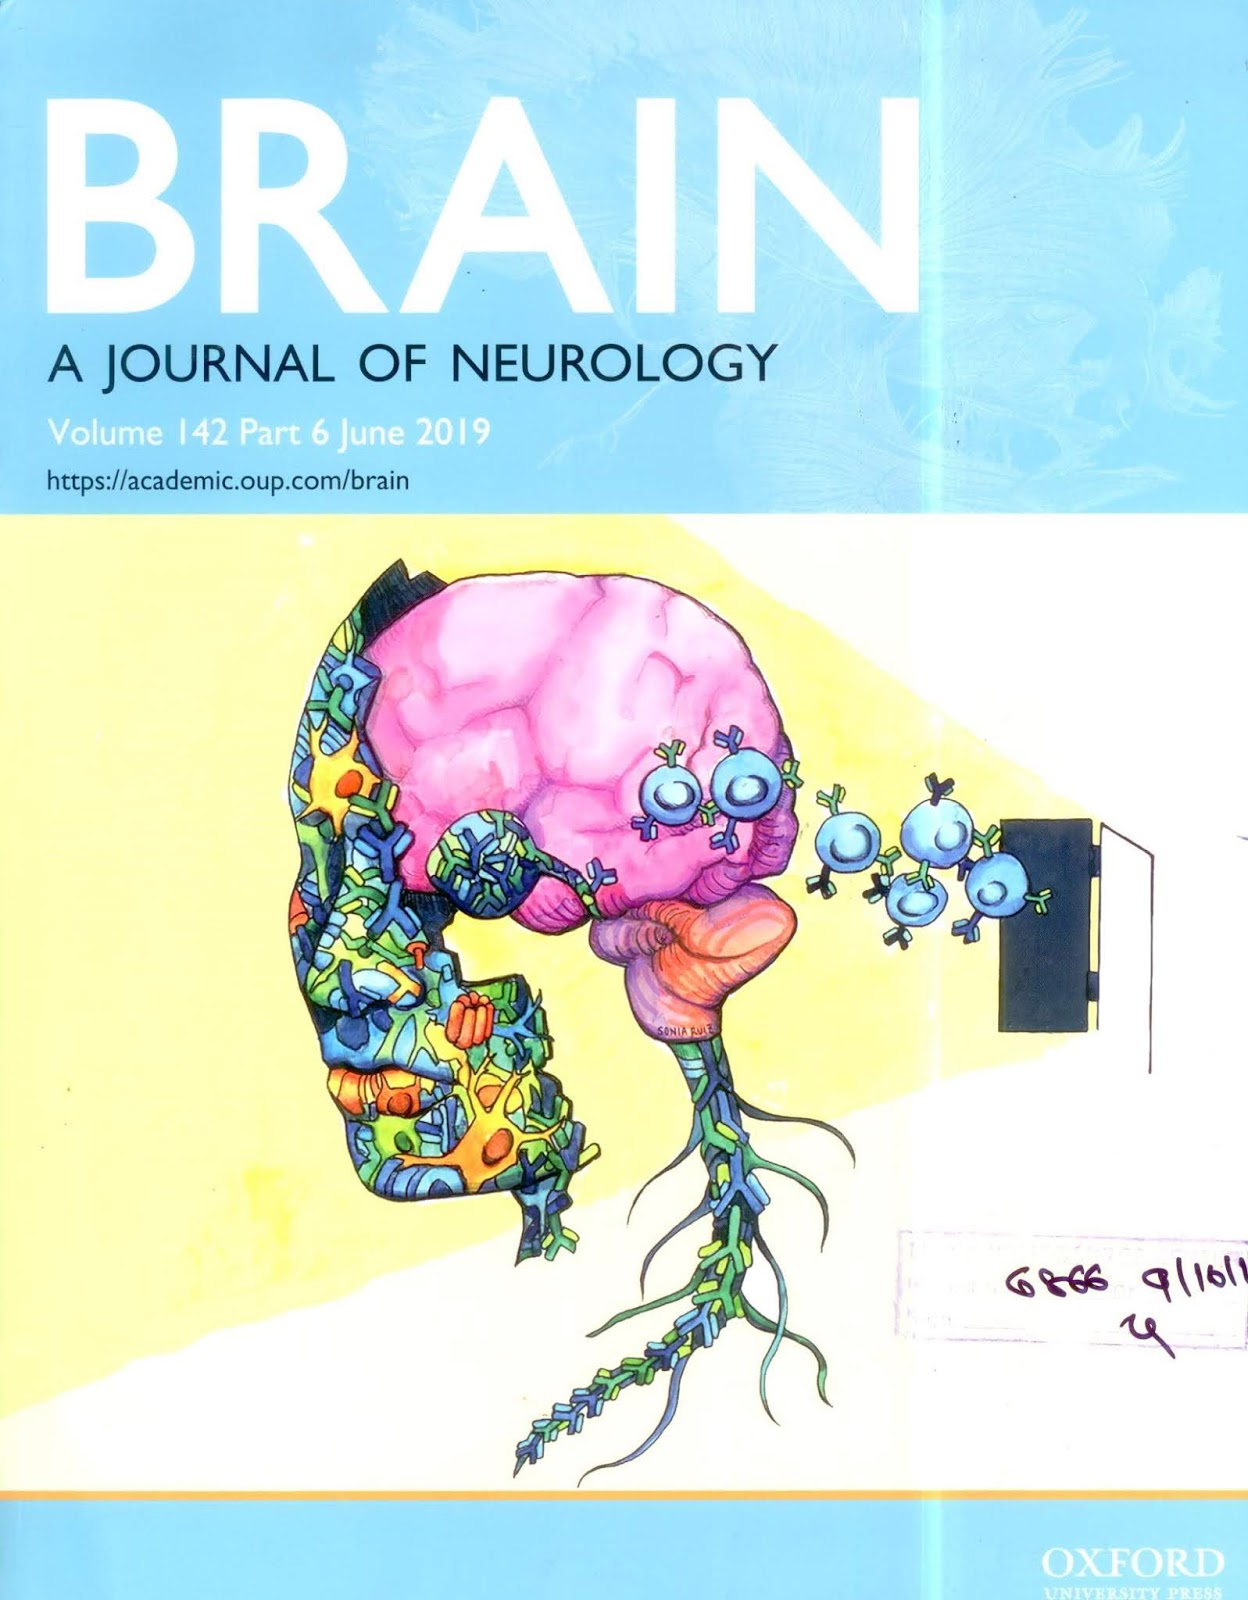 https://academic.oup.com/brain/issue/142/6